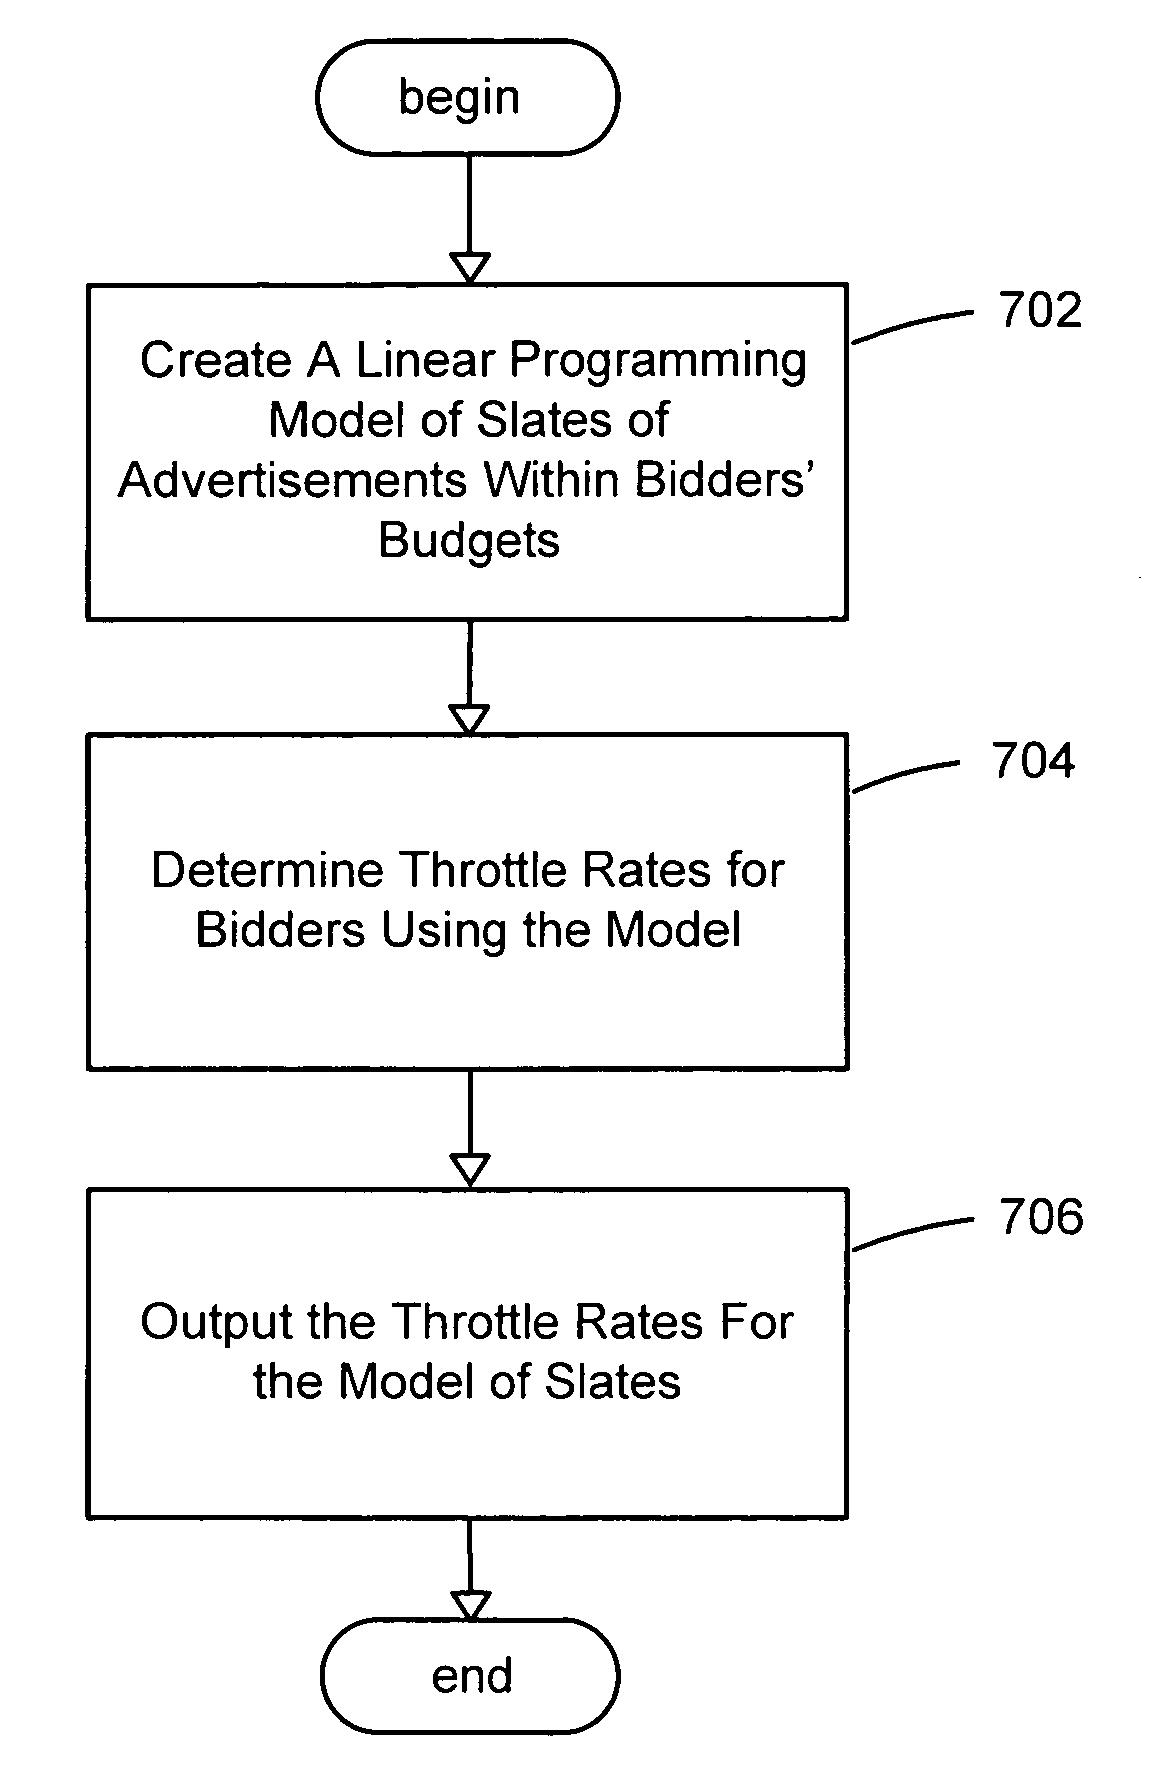 System and method for optimizing throttle rates of bidders in online keyword auctions subject to budget constraints